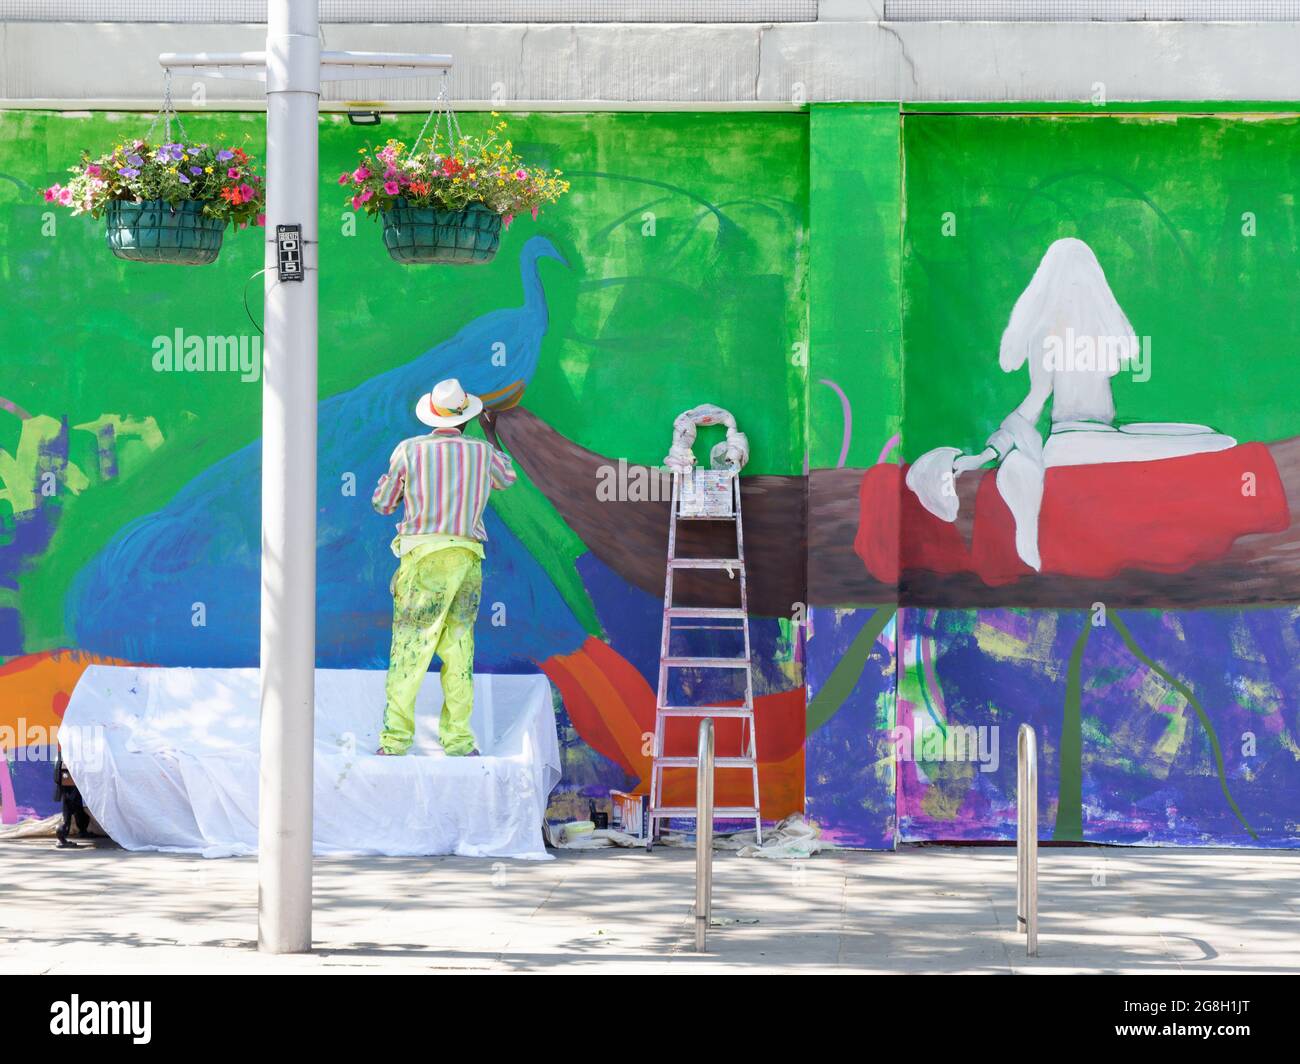 London, Greater London, England, June 12 2021: Man beside step ladder wearing a striped shirt paints a colourful wall on the Kings Road, Chelsea. Stock Photo